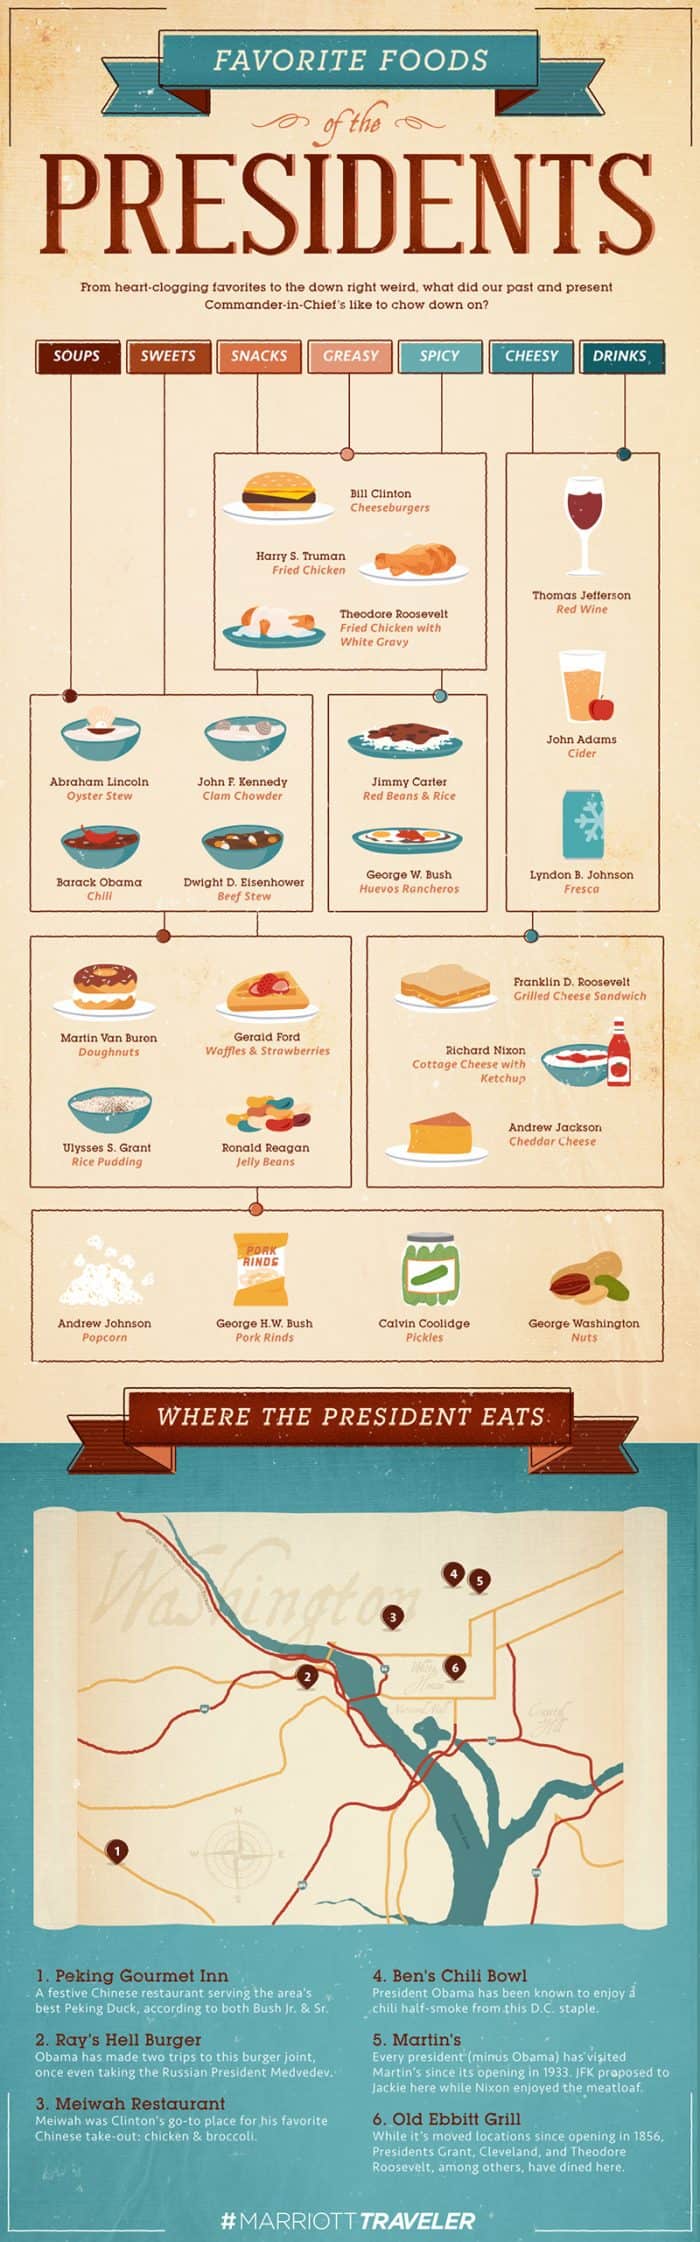 Some of the favorite foods from former U.S. presidents